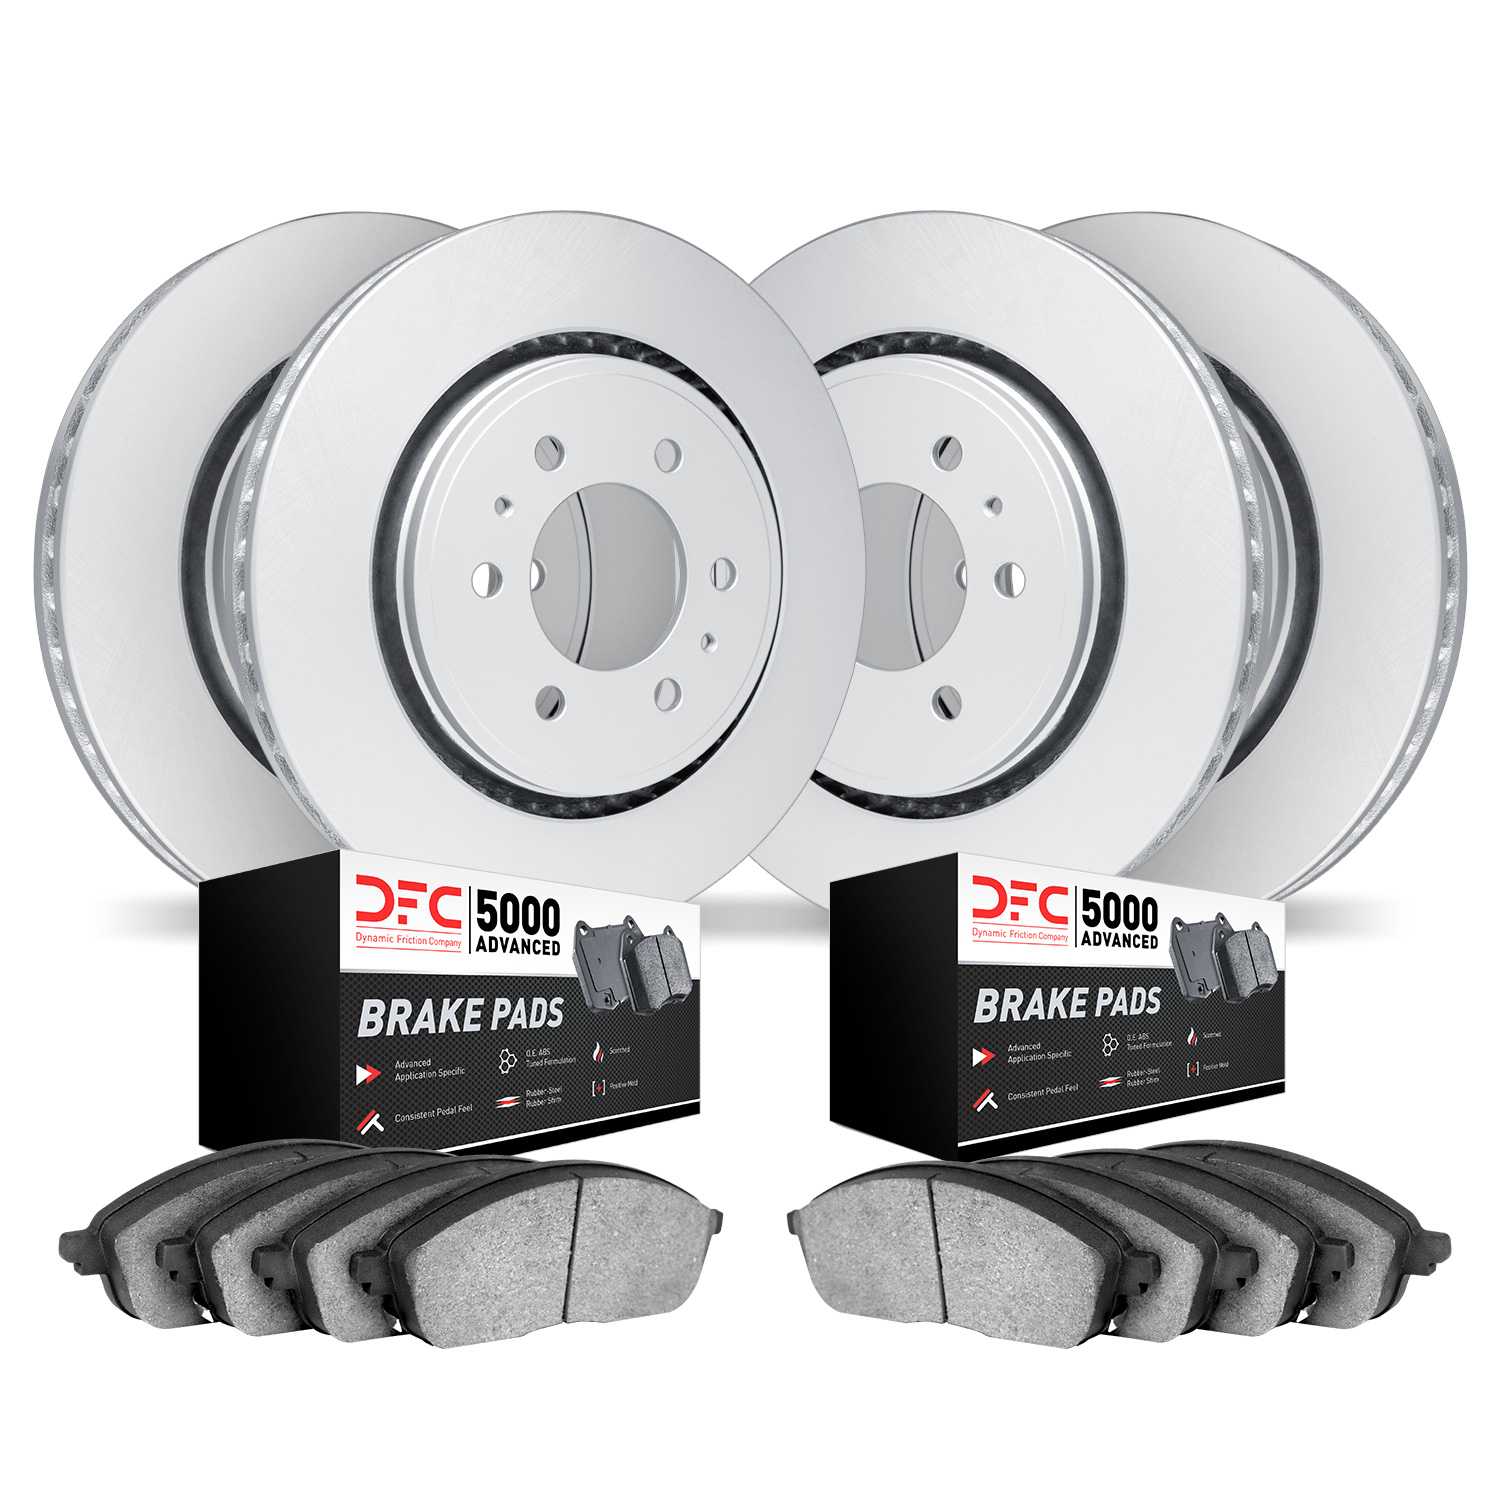 4504-54039 Geospec Brake Rotors w/5000 Advanced Brake Pads Kit, 2004-2008 Ford/Lincoln/Mercury/Mazda, Position: Front and Rear